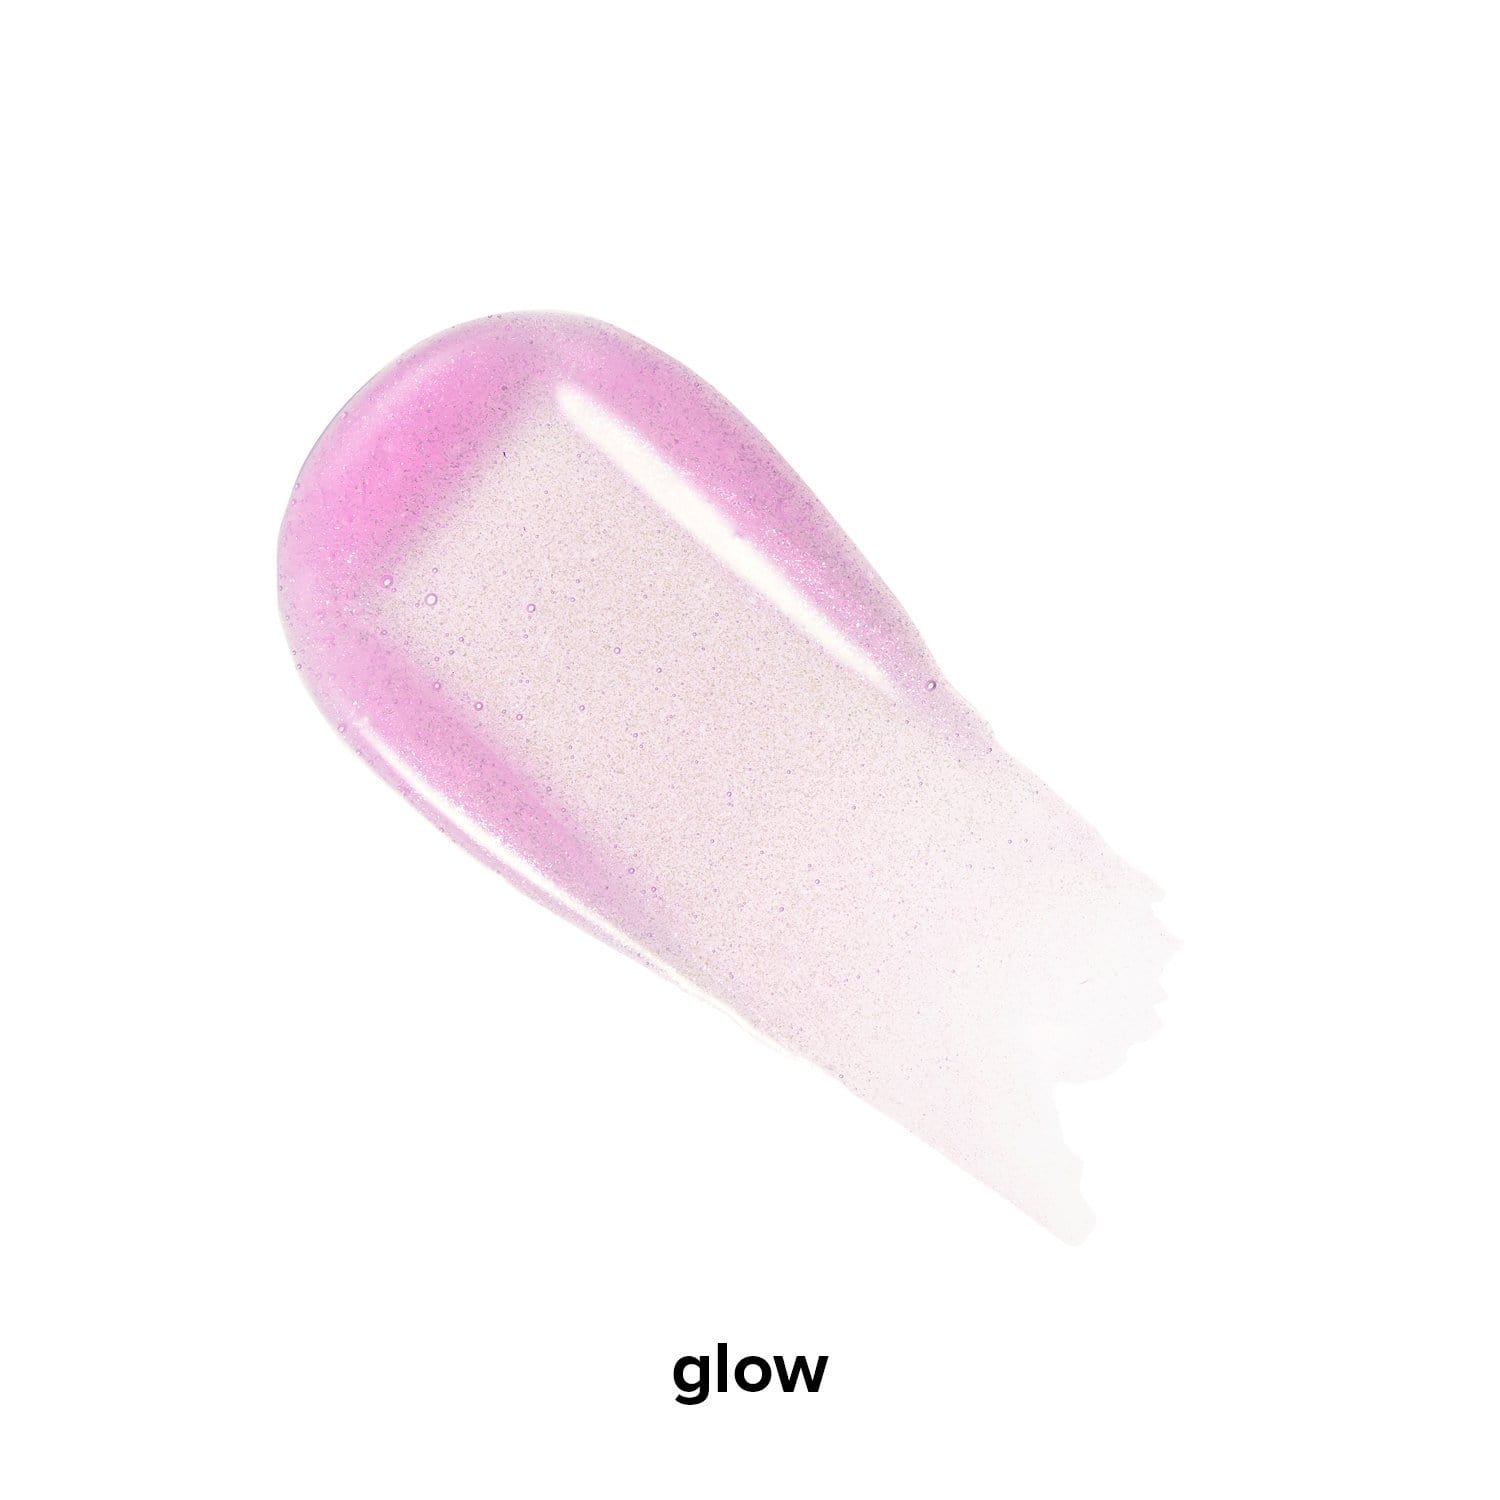 gloss'd Glow - Lilac Shimmer Makeup supercharged gloss oil